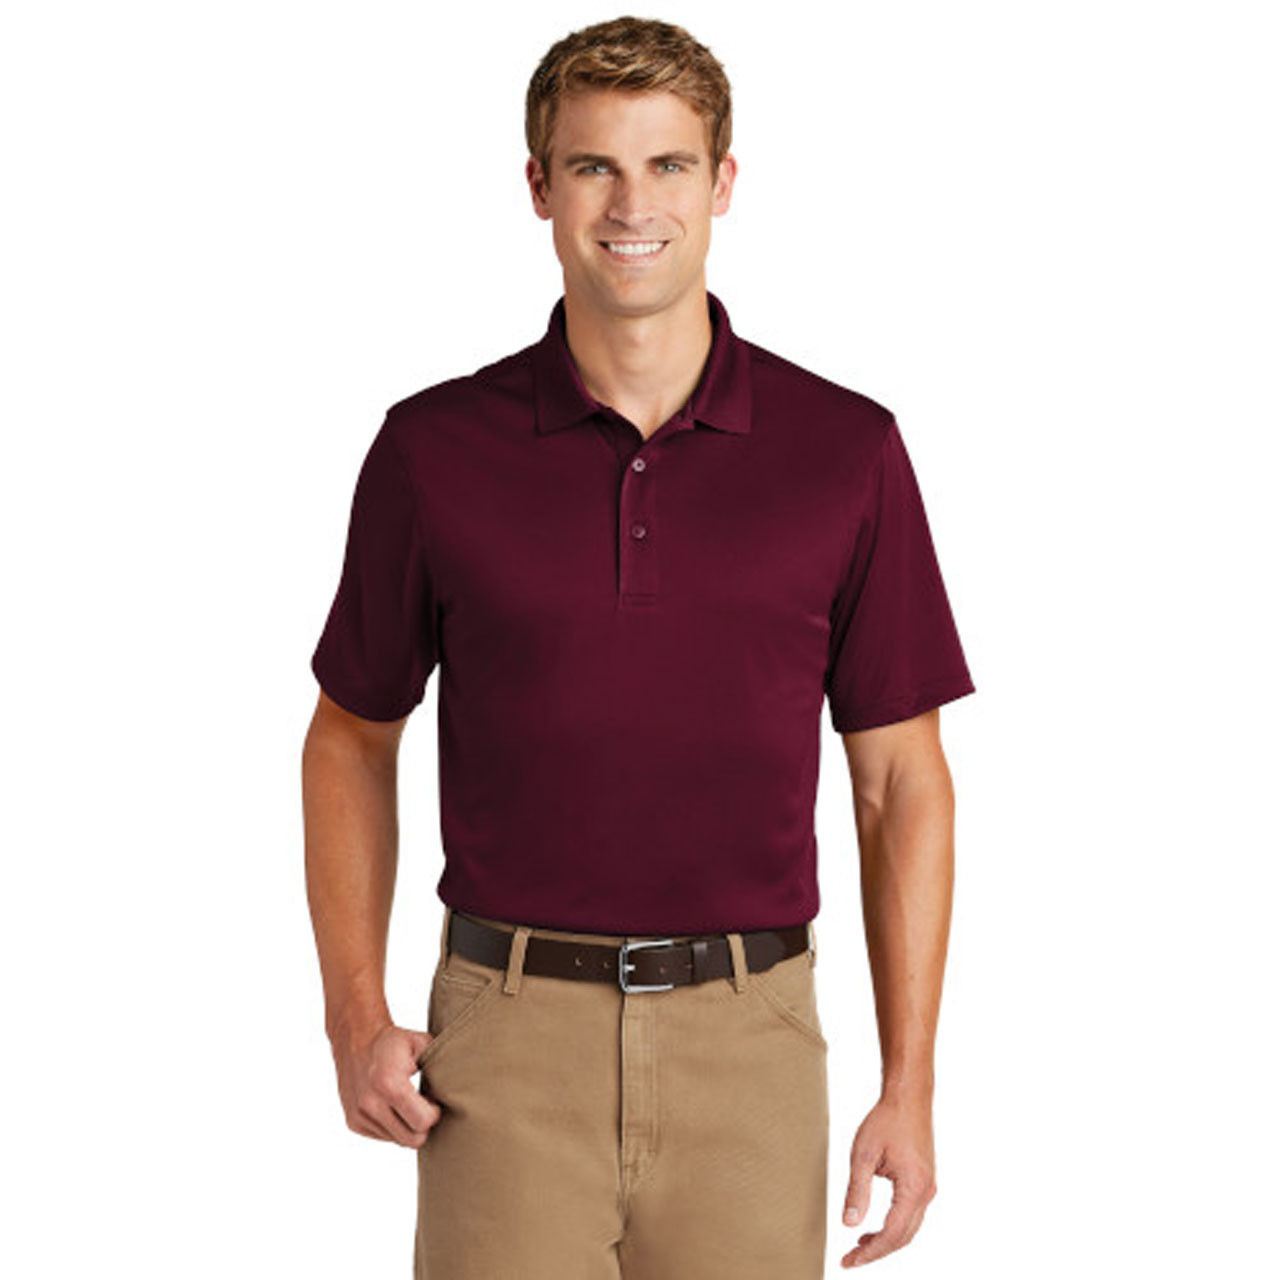 Are there different color options for the men's maroon polo shirt?